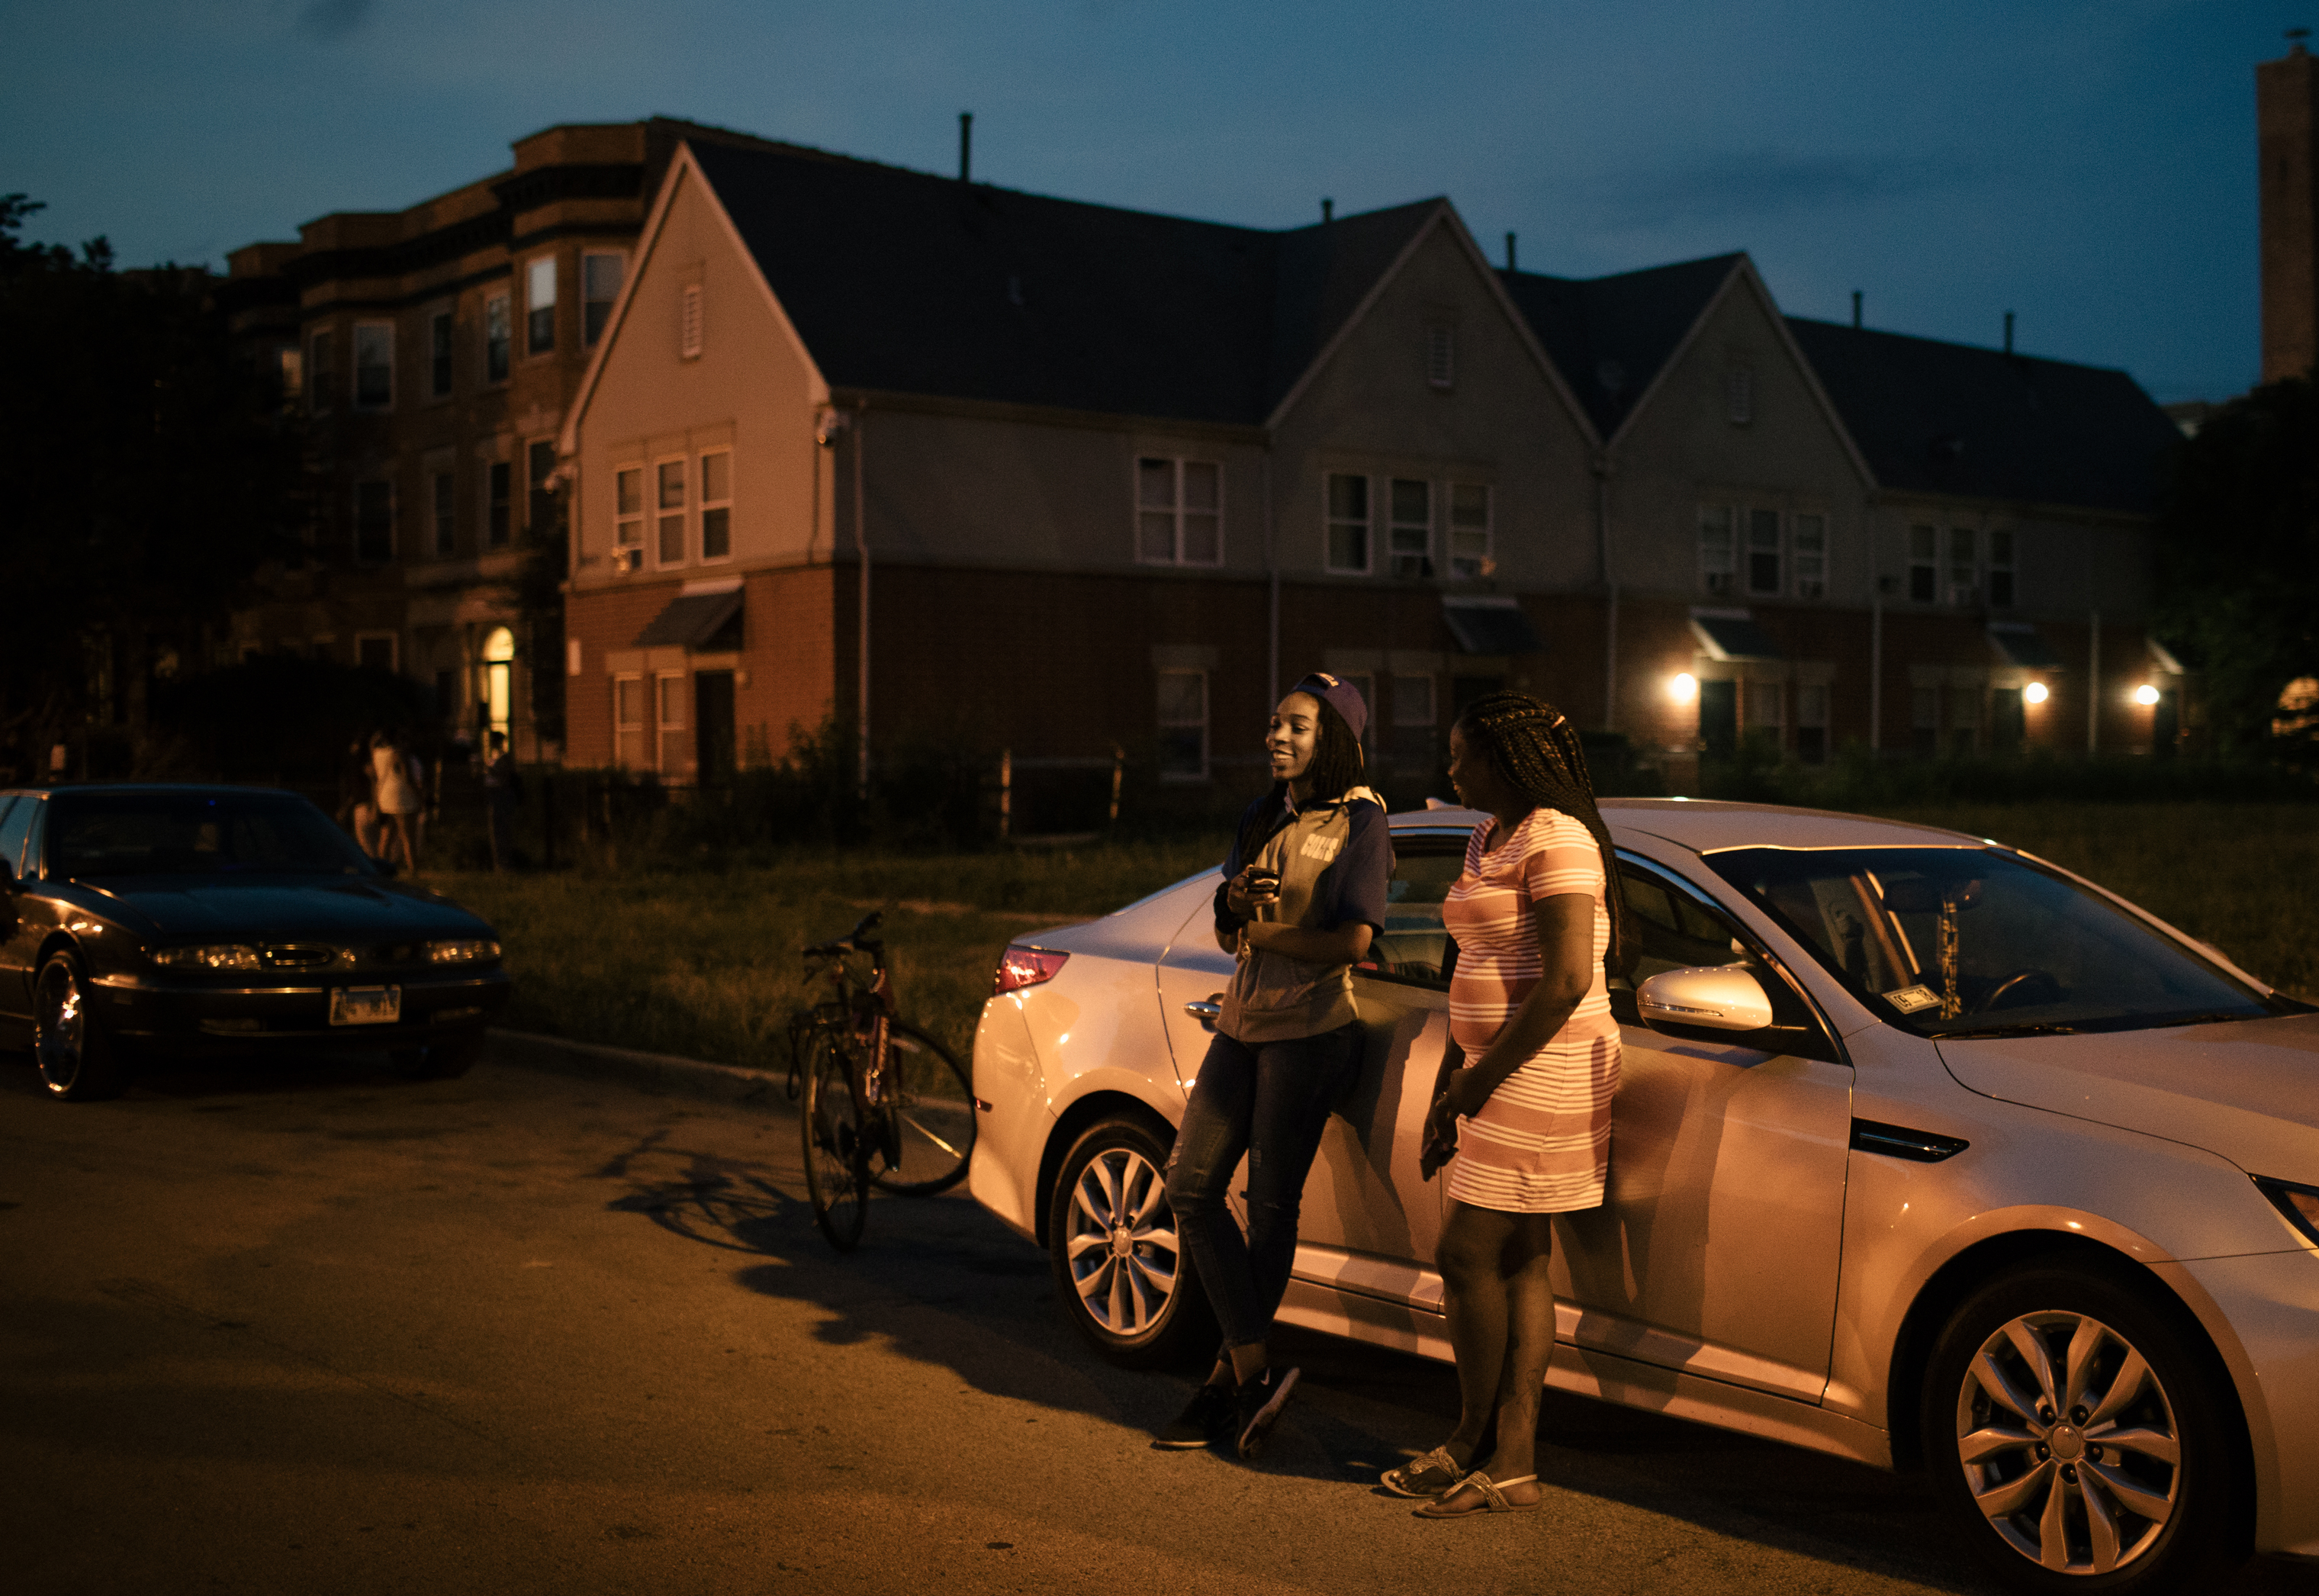 From left, Shawn-Tae, who asked to be identified only by her first name, and Sterling Okafor enjoy an evening together in the Woodlawn neighborhood on Chicago's South Side. (Alyssa Schukar for TIME)